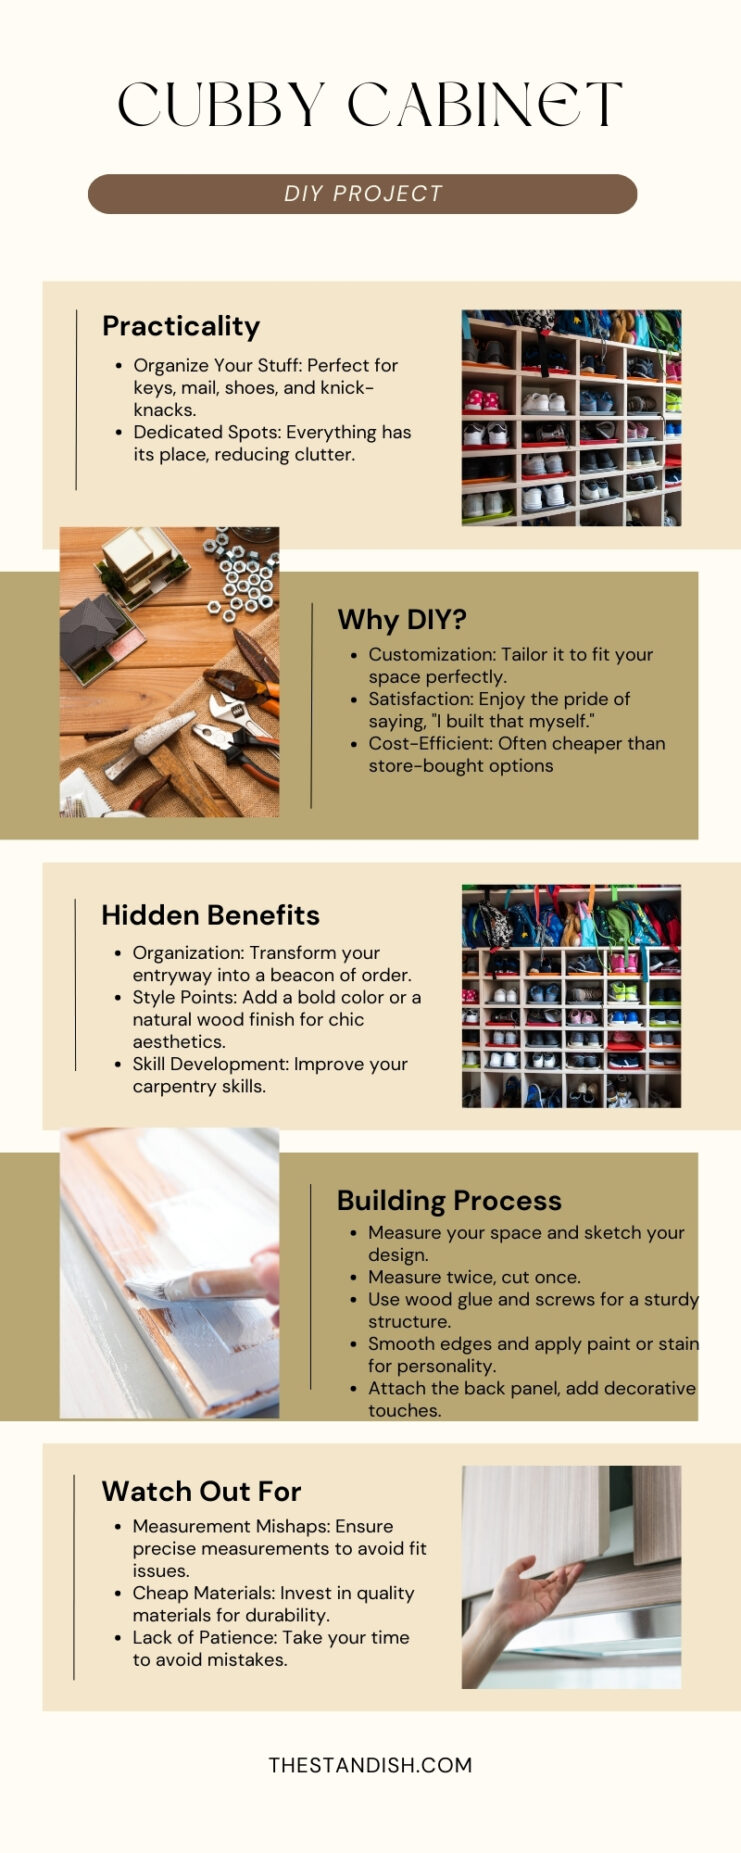 Cubby Cabinet DIY Project Infographic